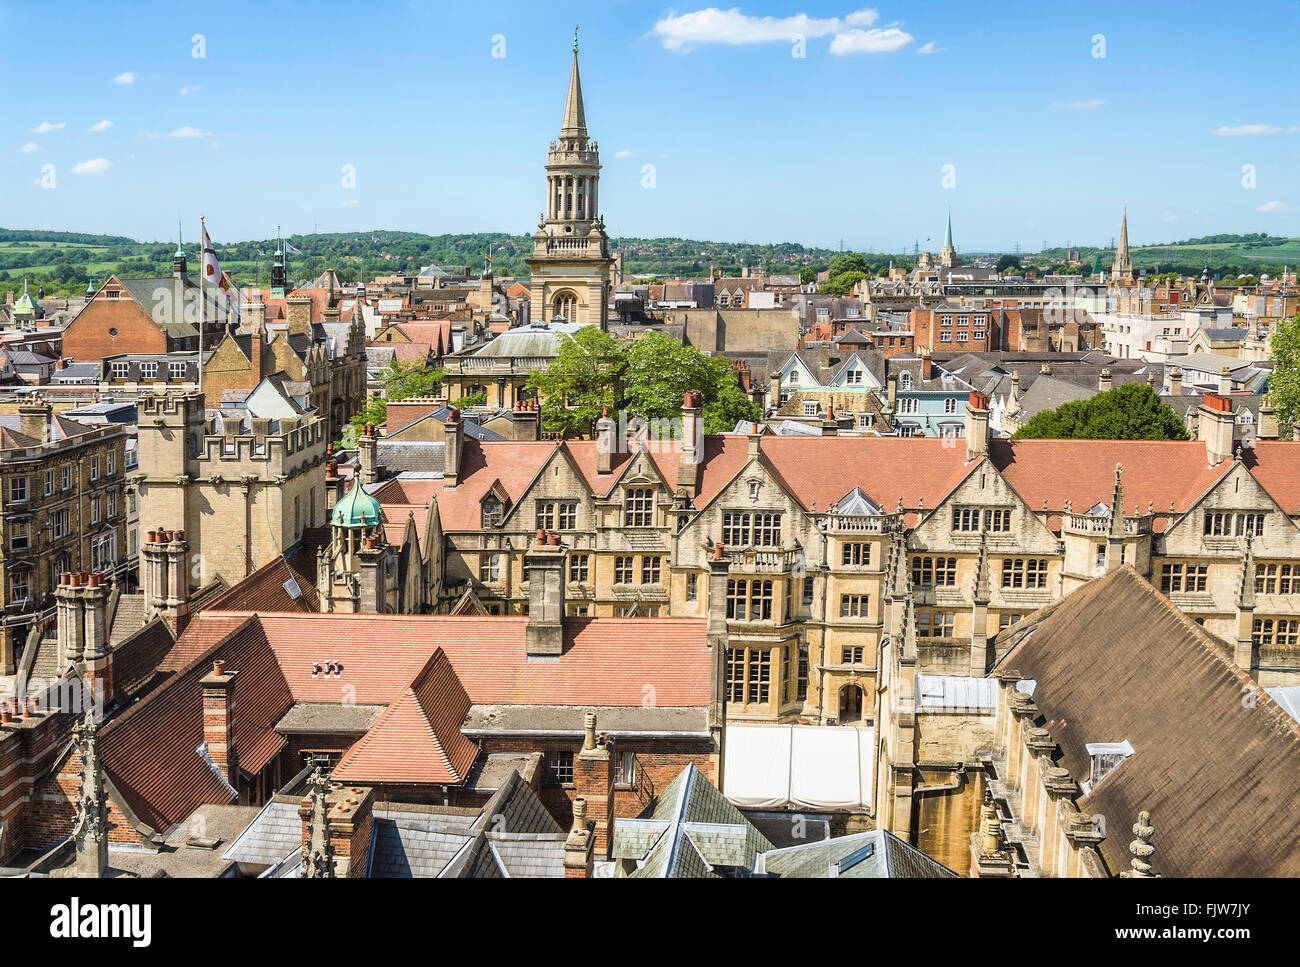 City view over the medieval Skyline of Oxford England Stock Photo